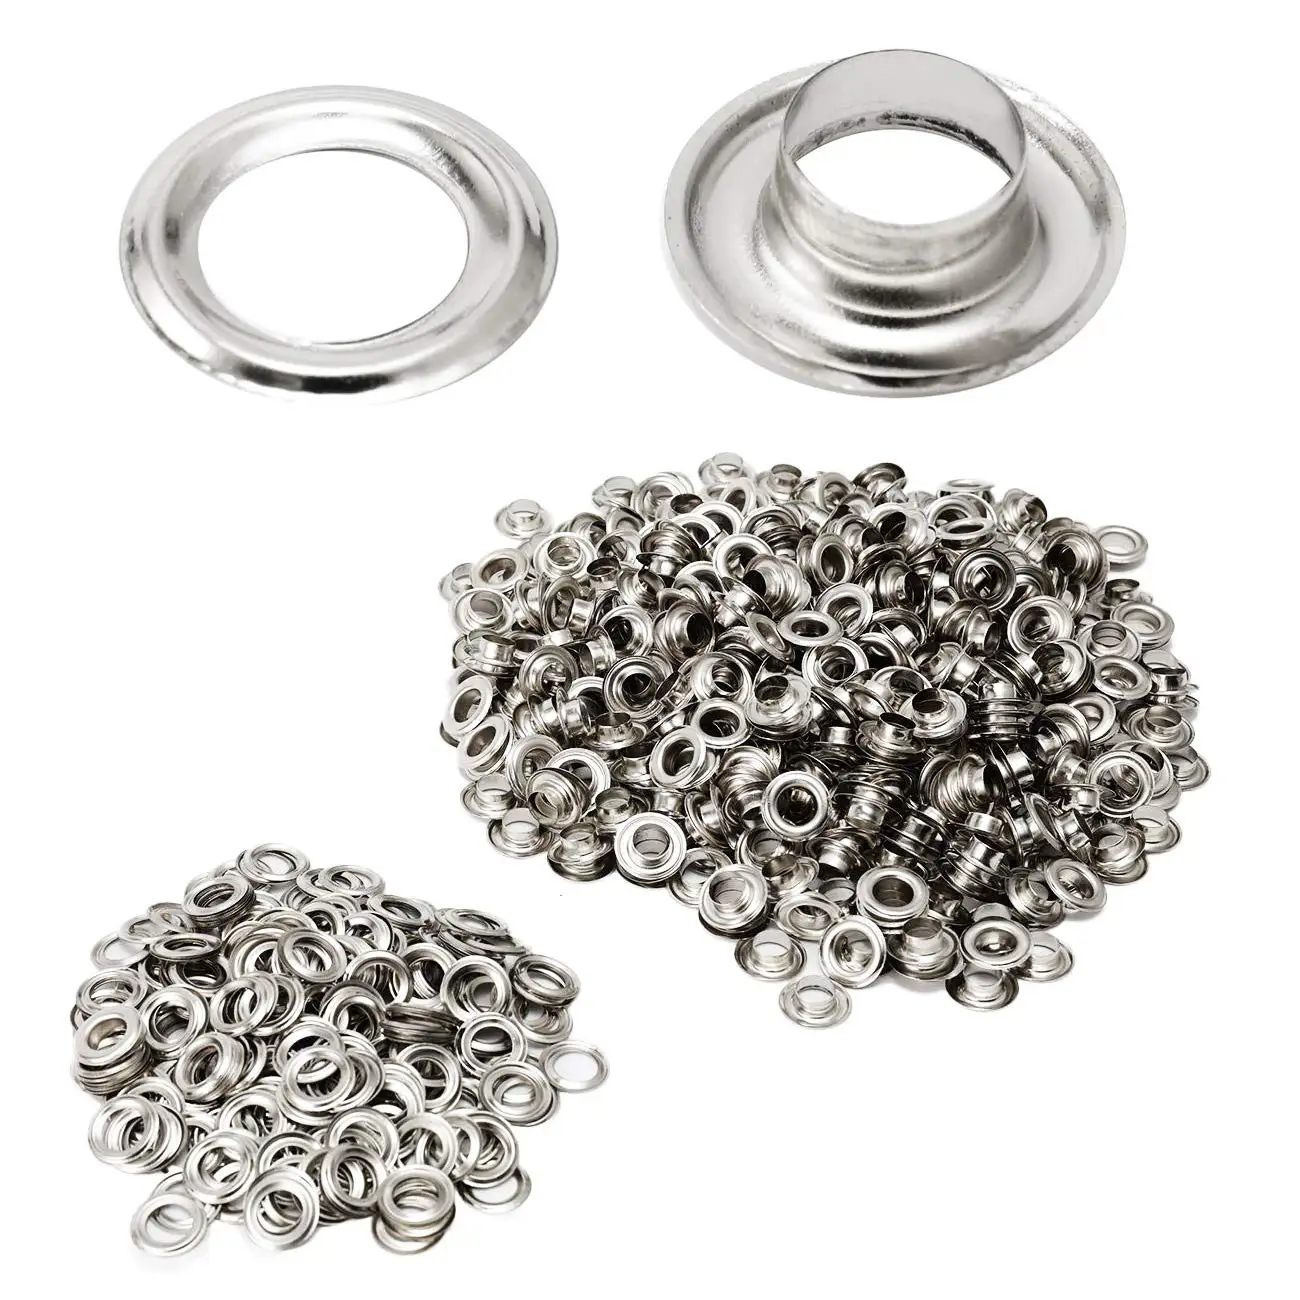 1000pcs Grommet Kit Metal Eyelets 3mm/4mm/5mm/8mm/10mm/12mm/14mm/17mm With Washer For Curtains Leather Canvas Belt Silver Gold